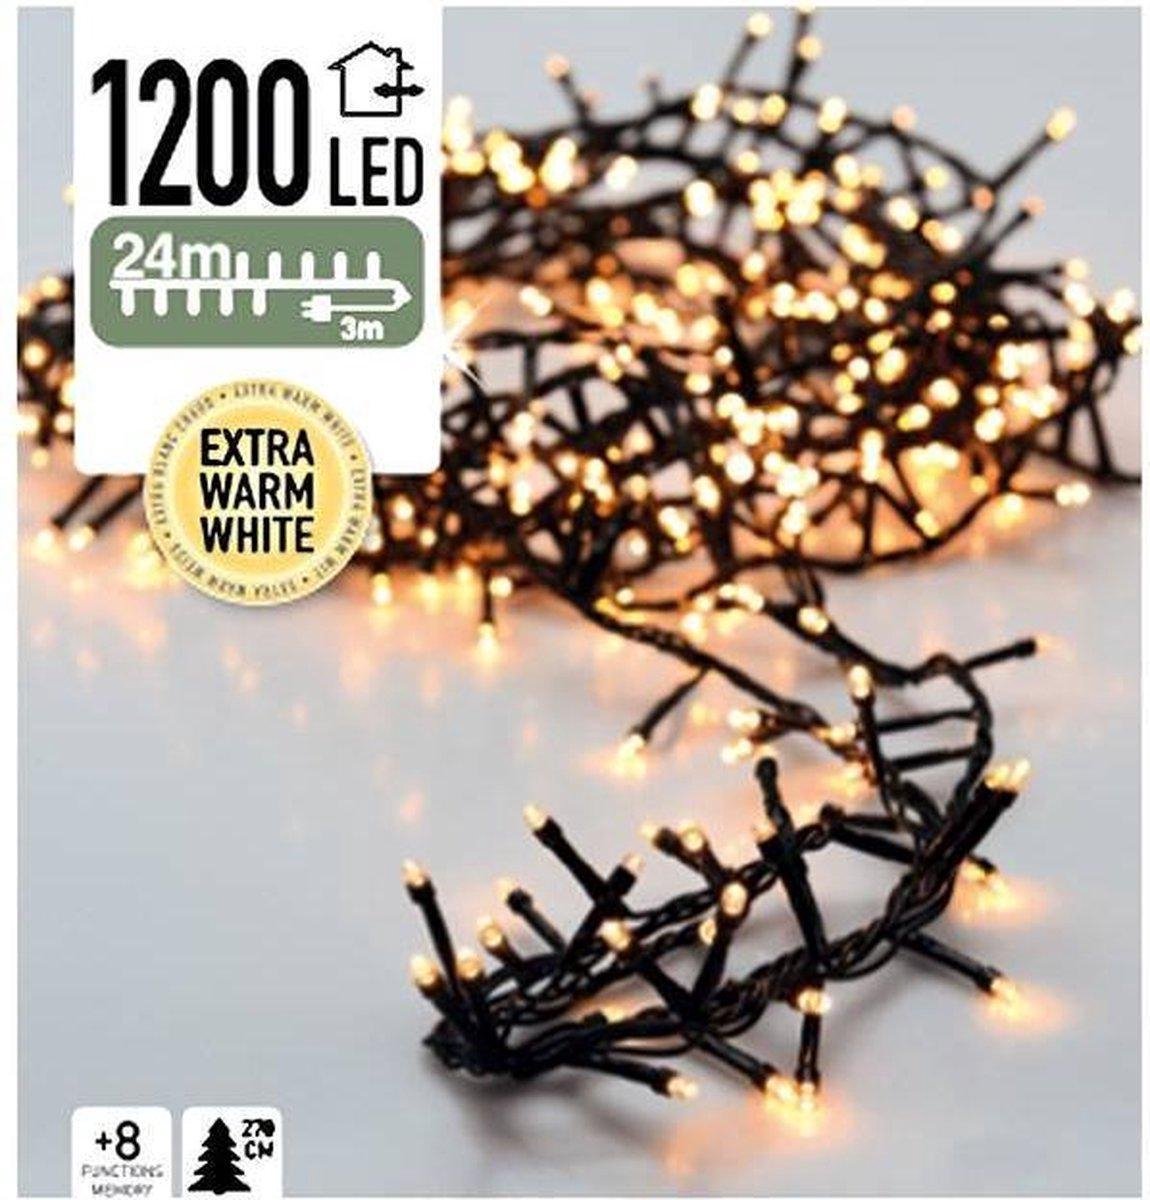 Micro Cluster Kerstverlichting 1200 LED's 24m EXTRA Warm Wit - Lichtsnoer Kerst - It's All About Christmas™